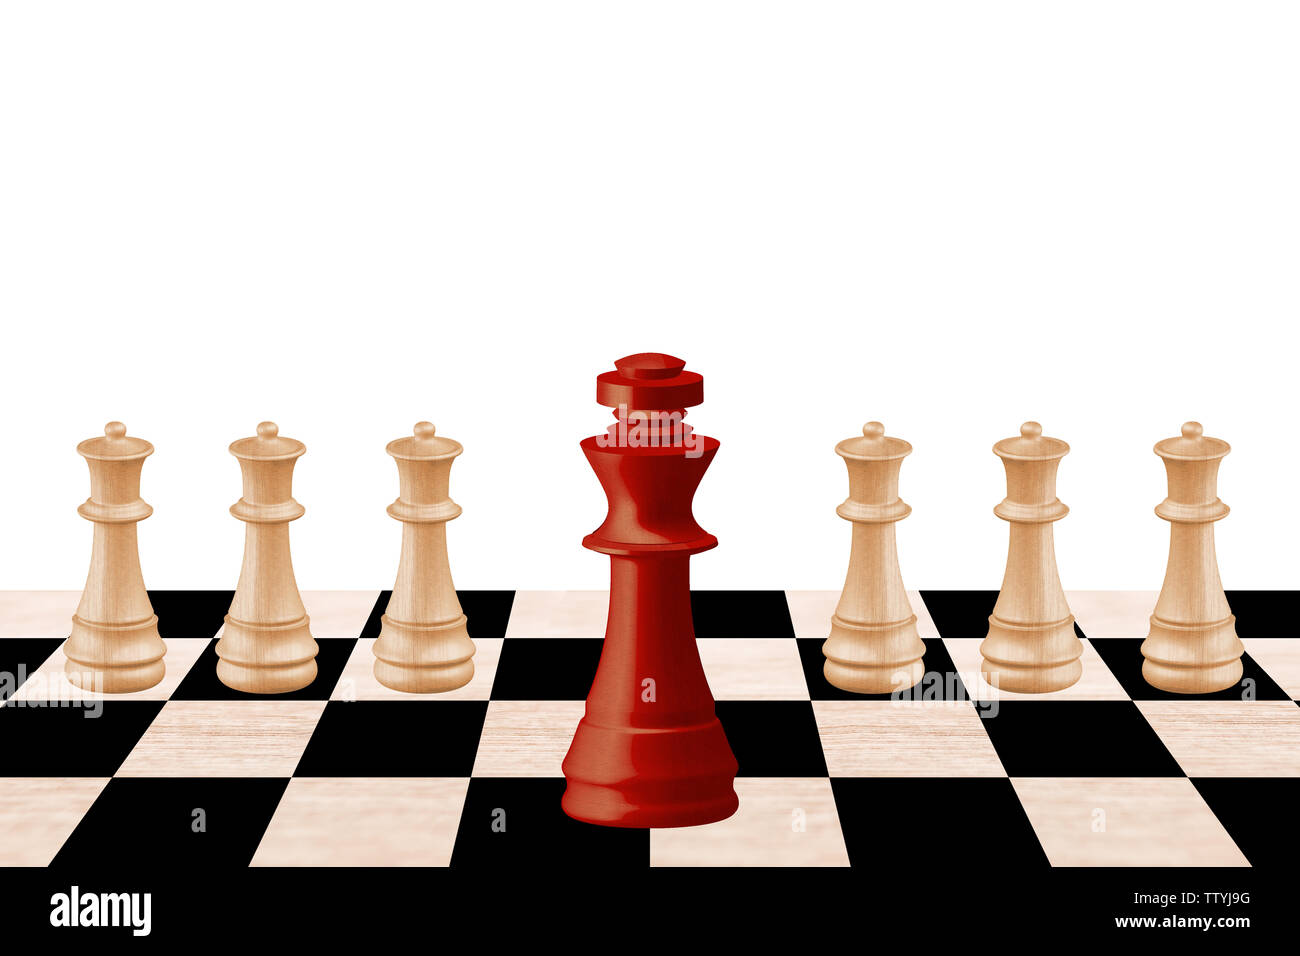 Chess business concept with leaders and success concept ideas Stock Photo